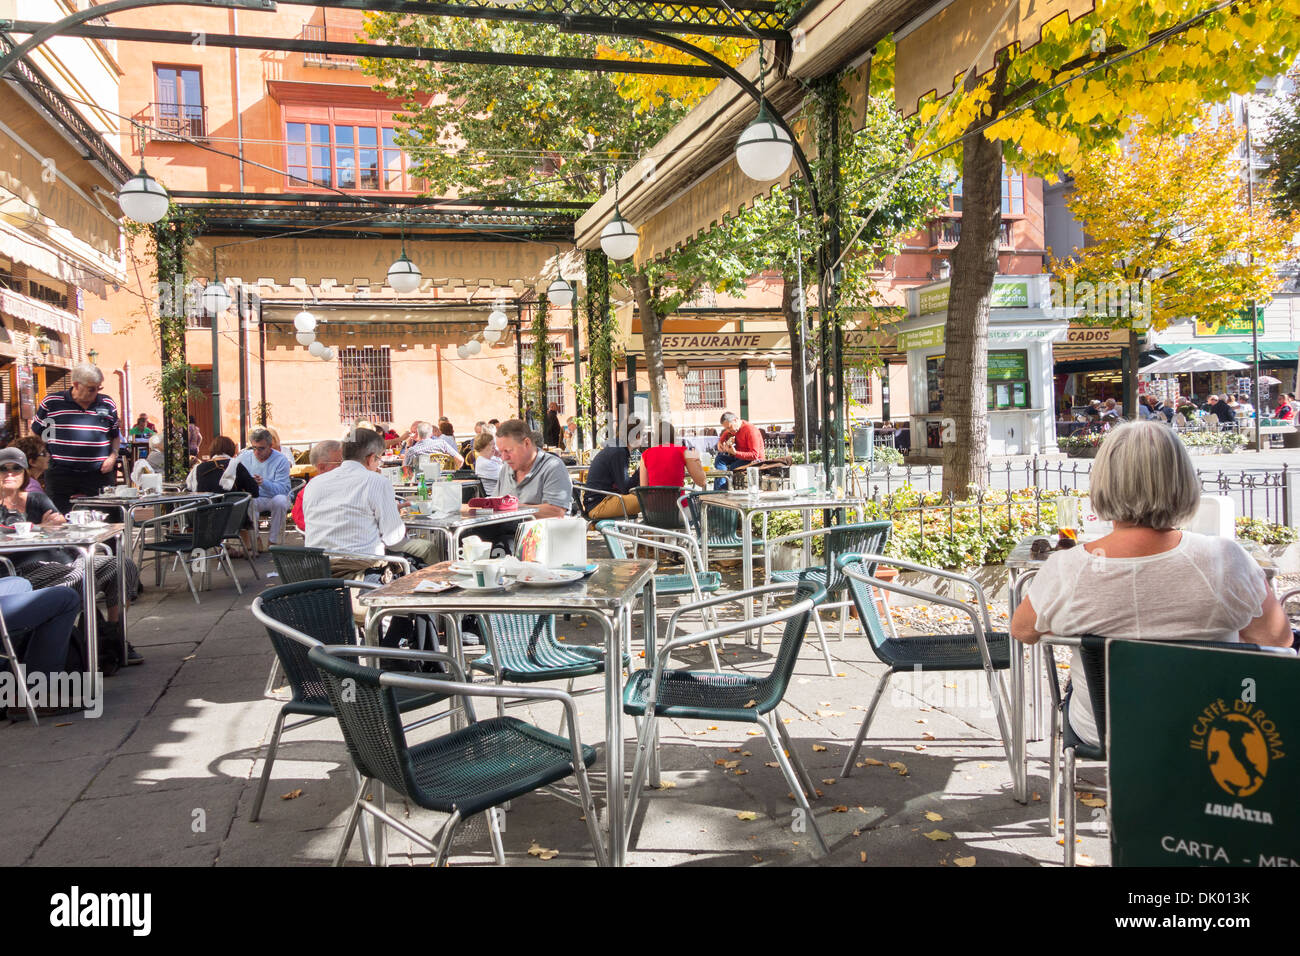 Cafe with people eating and drinking outside in the Spanish city of Granada Stock Photo